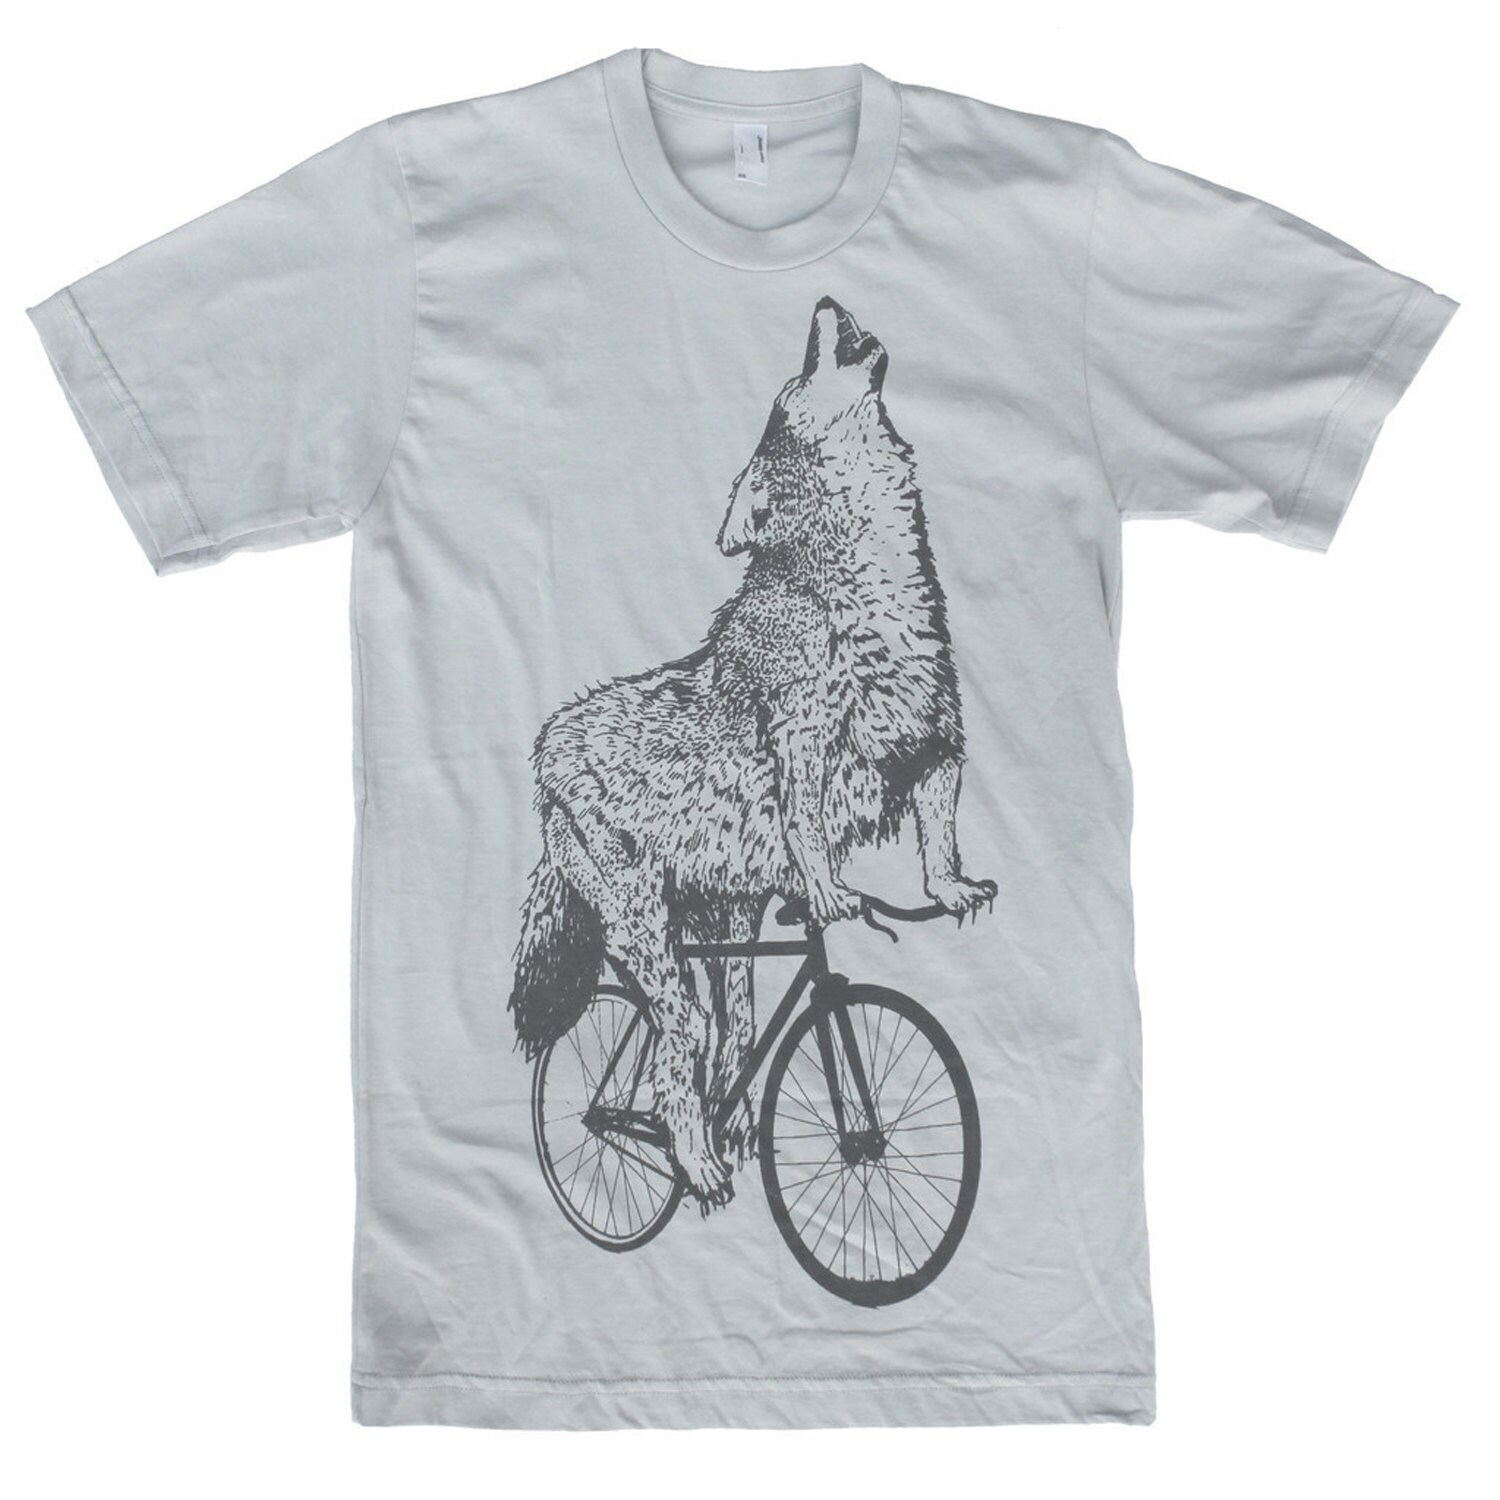 Mens WOLF Bicycle Print Short Sleeved by darkcycleclothing on Etsy